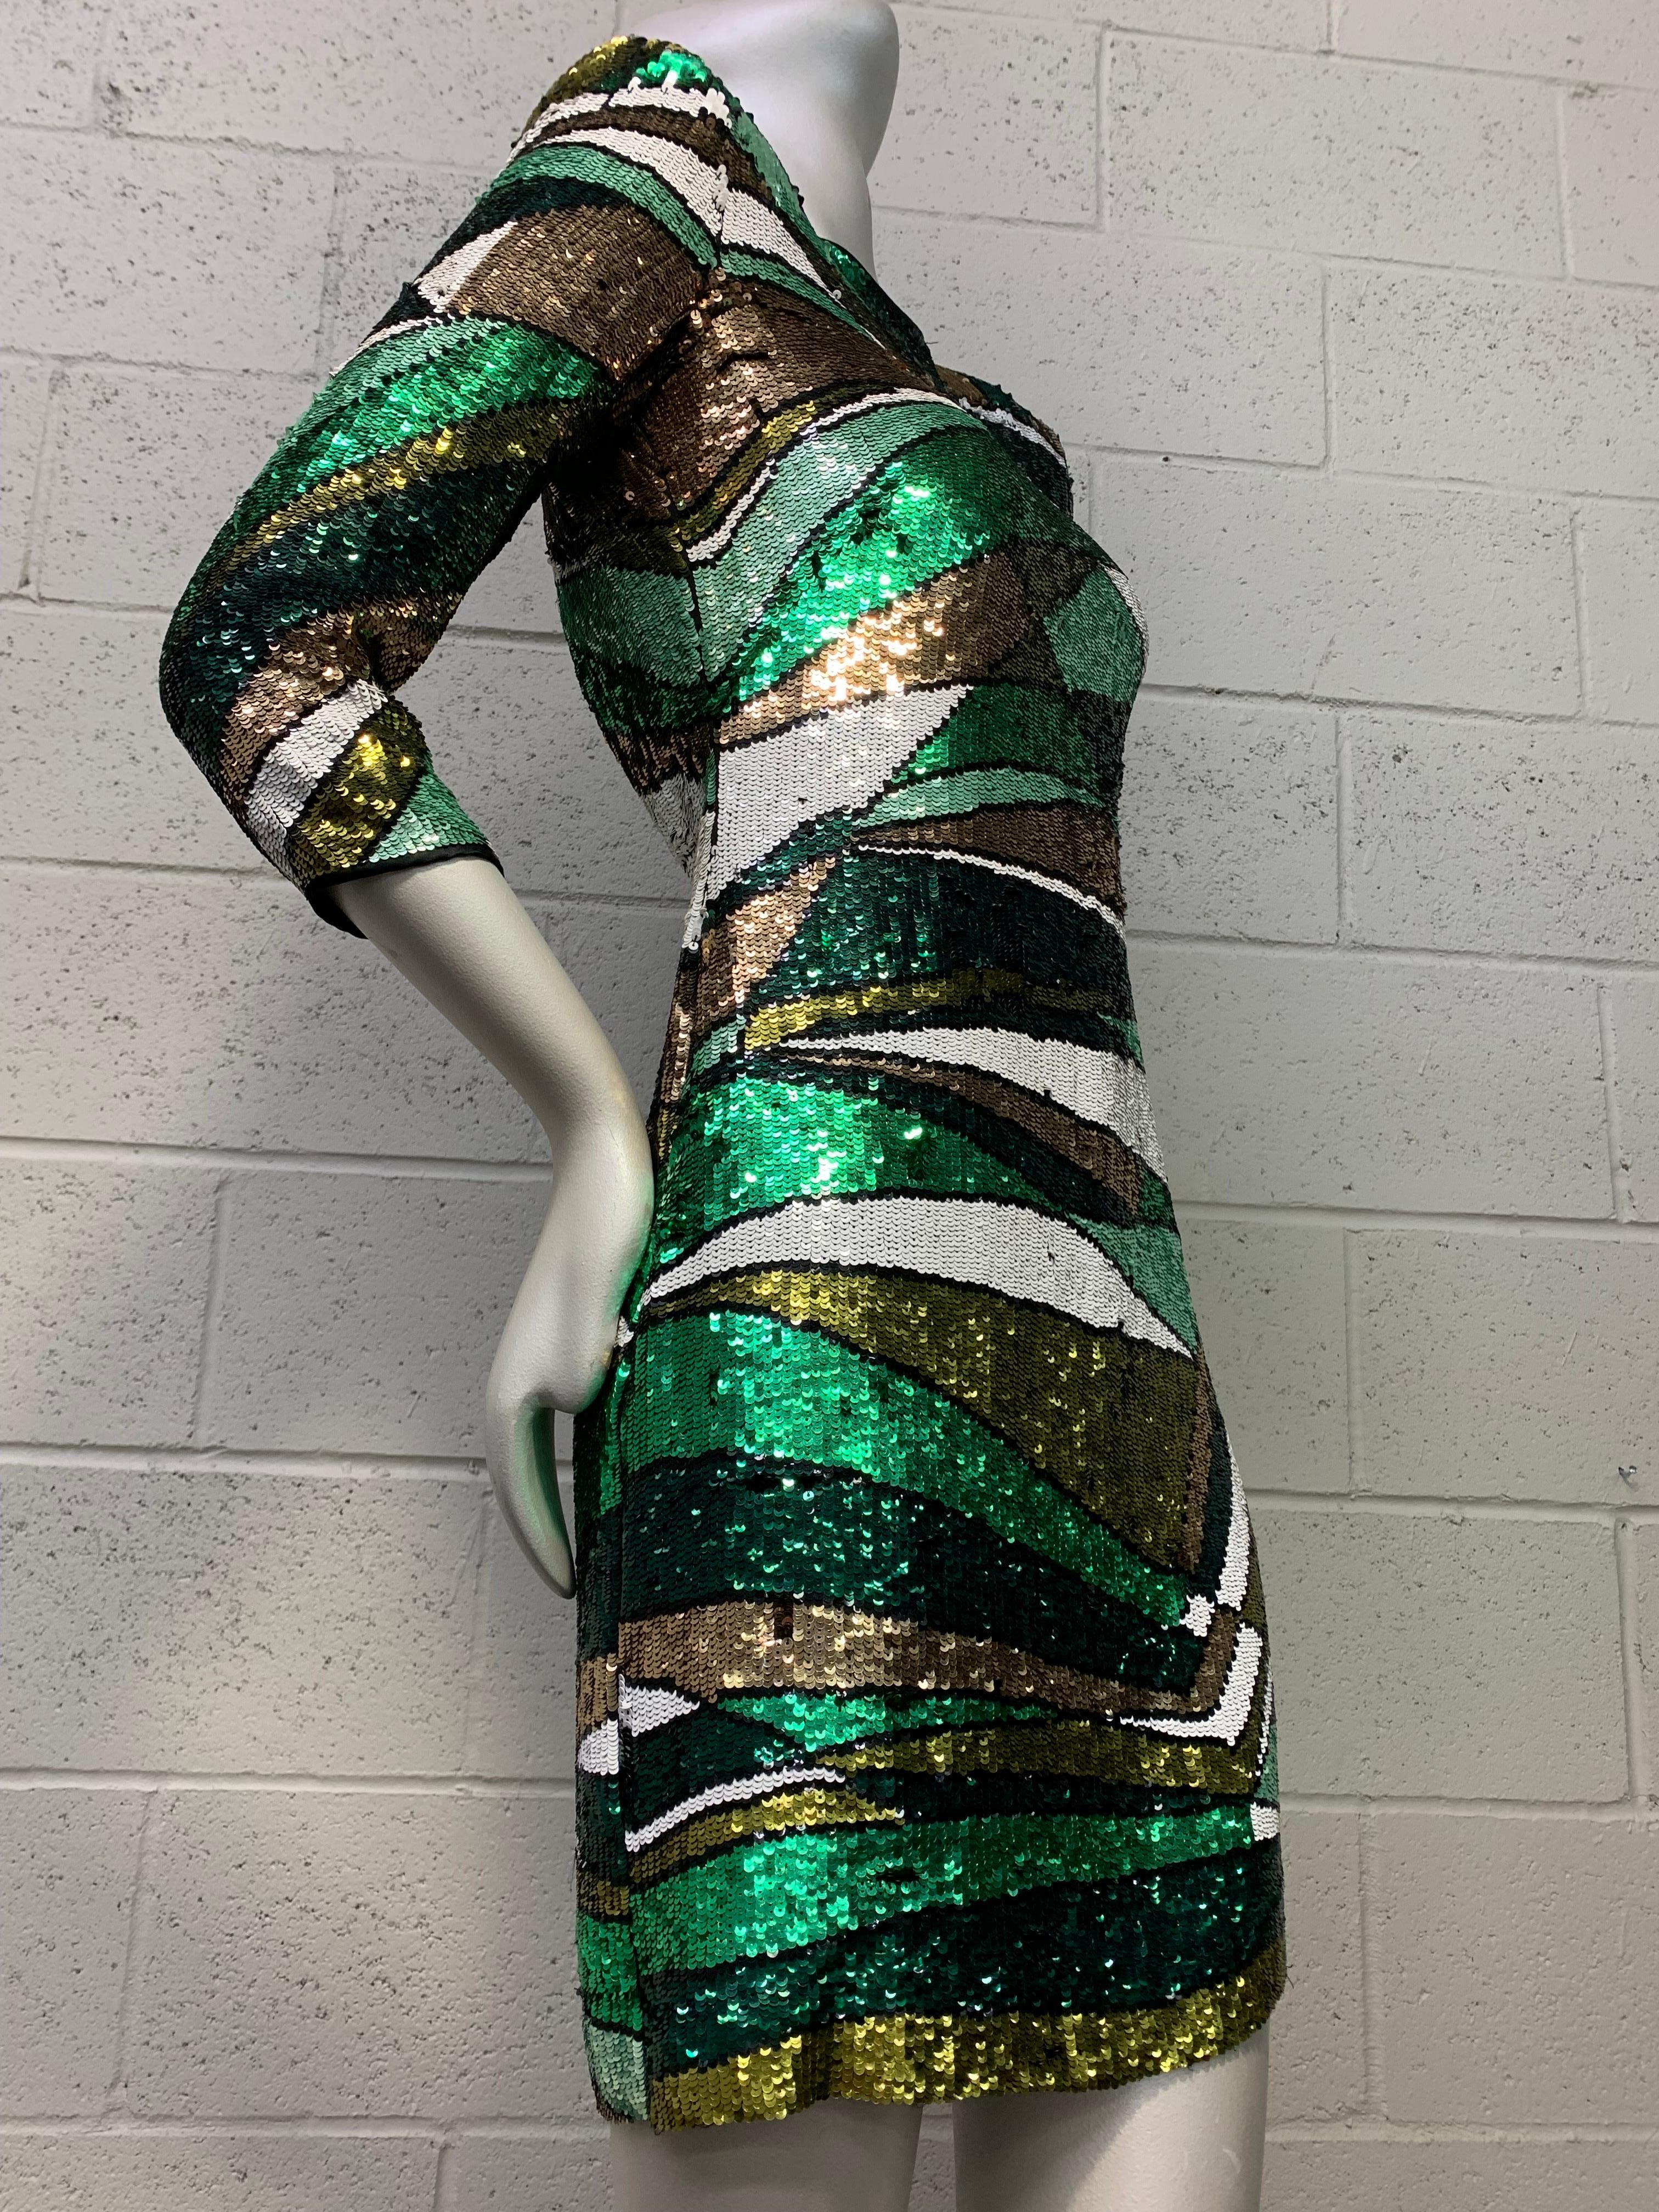 Emilio Pucci Green Metallic Prism Pattern Sequin Mini Dress w Open Keyhole Back. Zipper at back. Hook and eye at neck. Base fabric is silk and lined in silk chiffon. Boat neck and 3/4 sleeves. New, never worn. Size 38. 